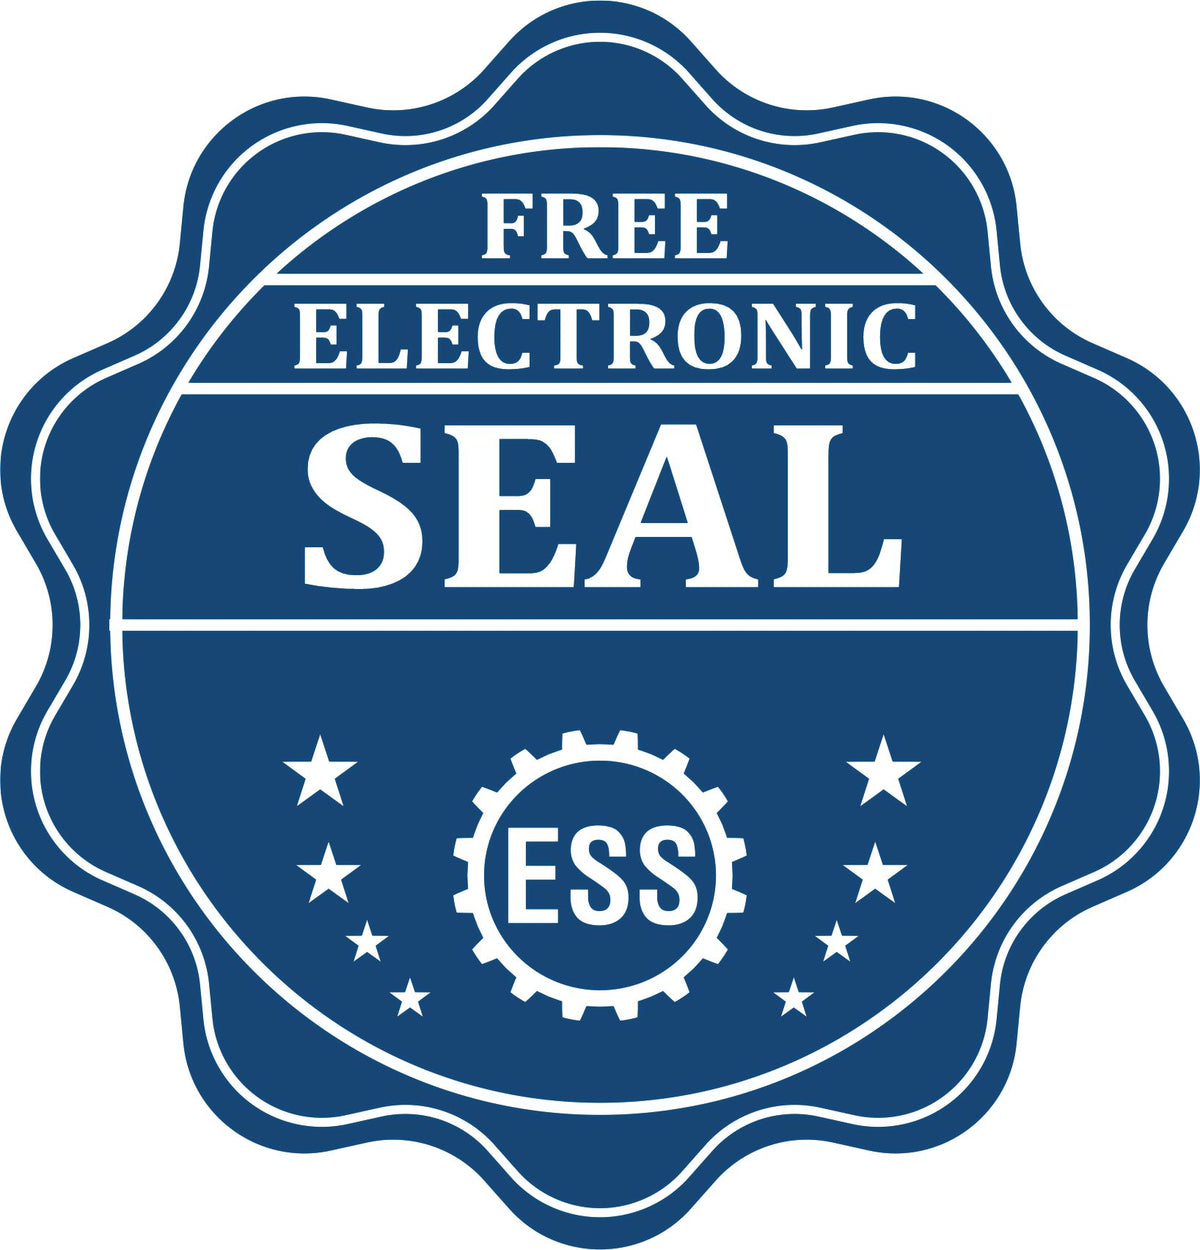 A badge showing a free electronic seal for the Premium MaxLight Pre-Inked South Carolina Geology Stamp with stars and the ESS gear on the emblem.